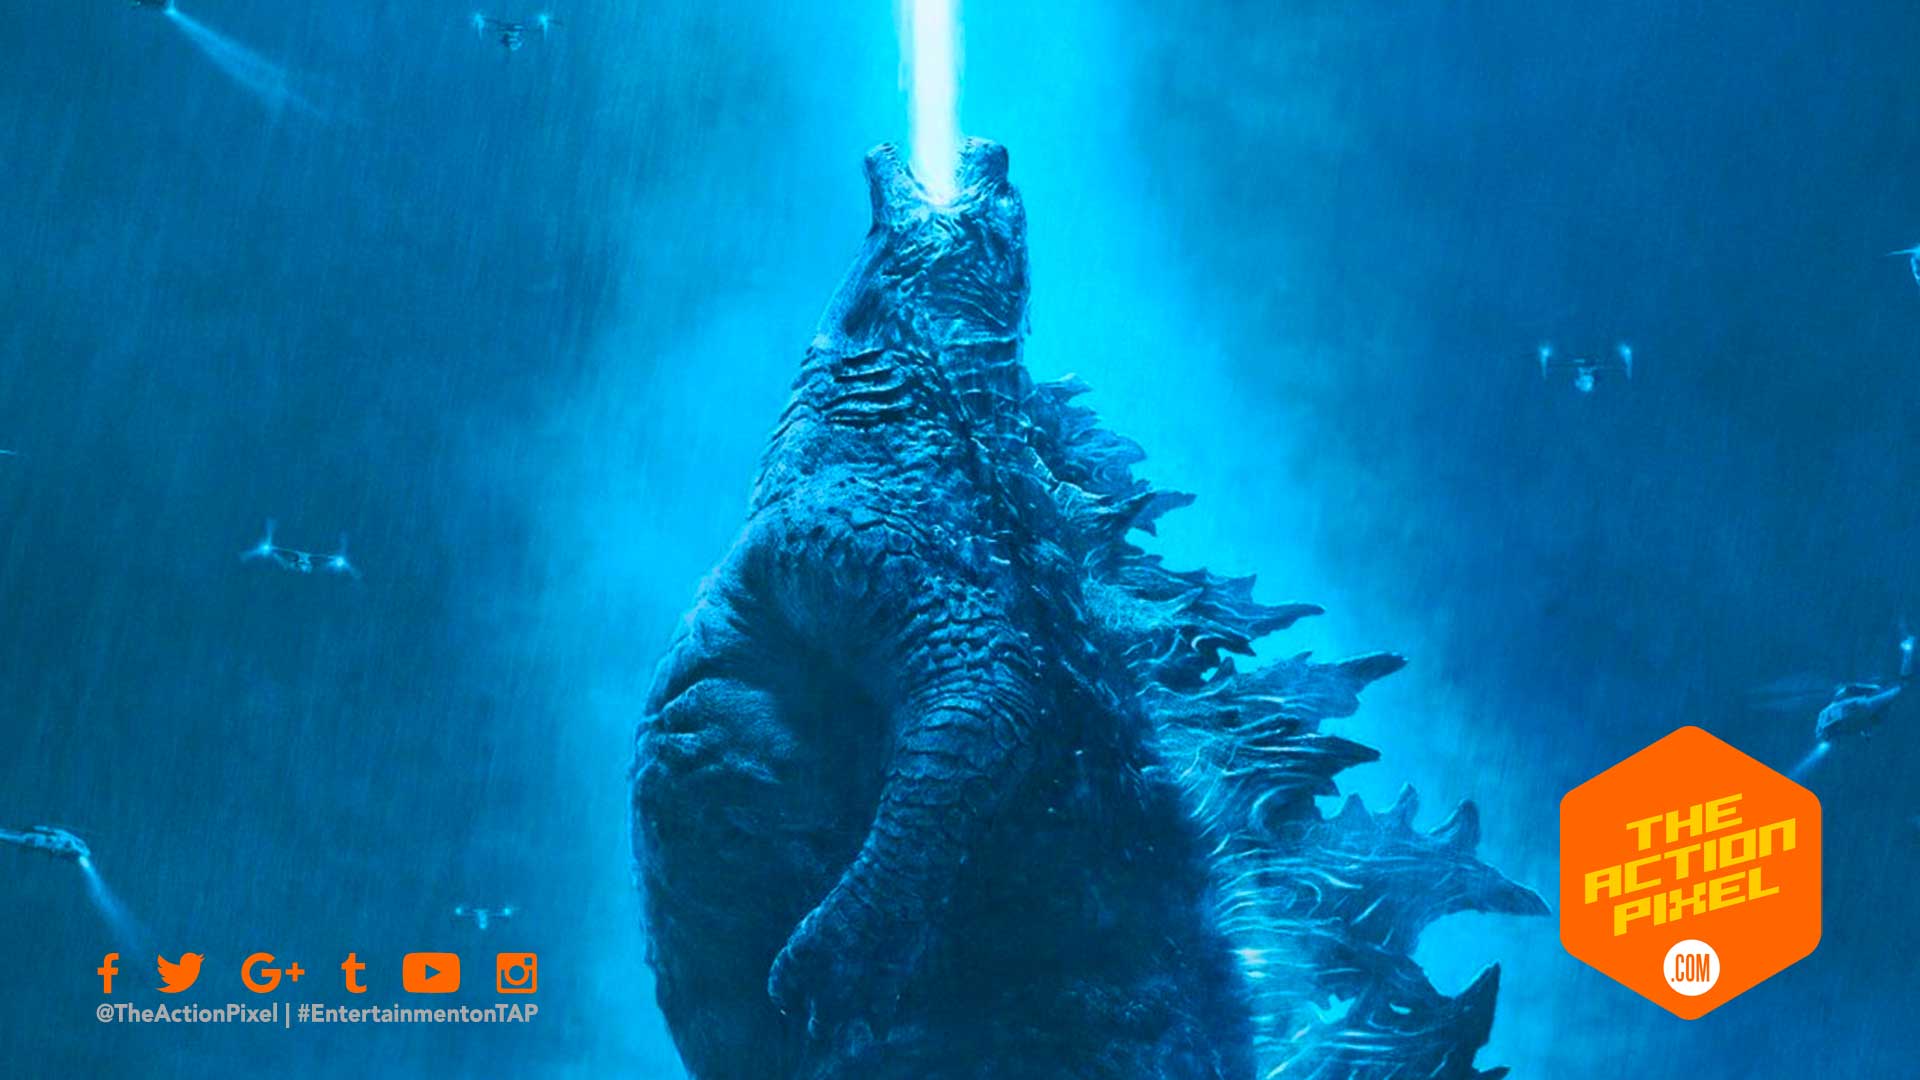 ghidorah, mothra, godzilla, rodan, poster, warner bros. pictures, trailer, character poster, trailer 2,godzilla: king of the monsters, godzilla, millie bobby brown, the action pixel, entertainment on tap, atomic breath,godzilla poster, atomic breath, godzilla 2019